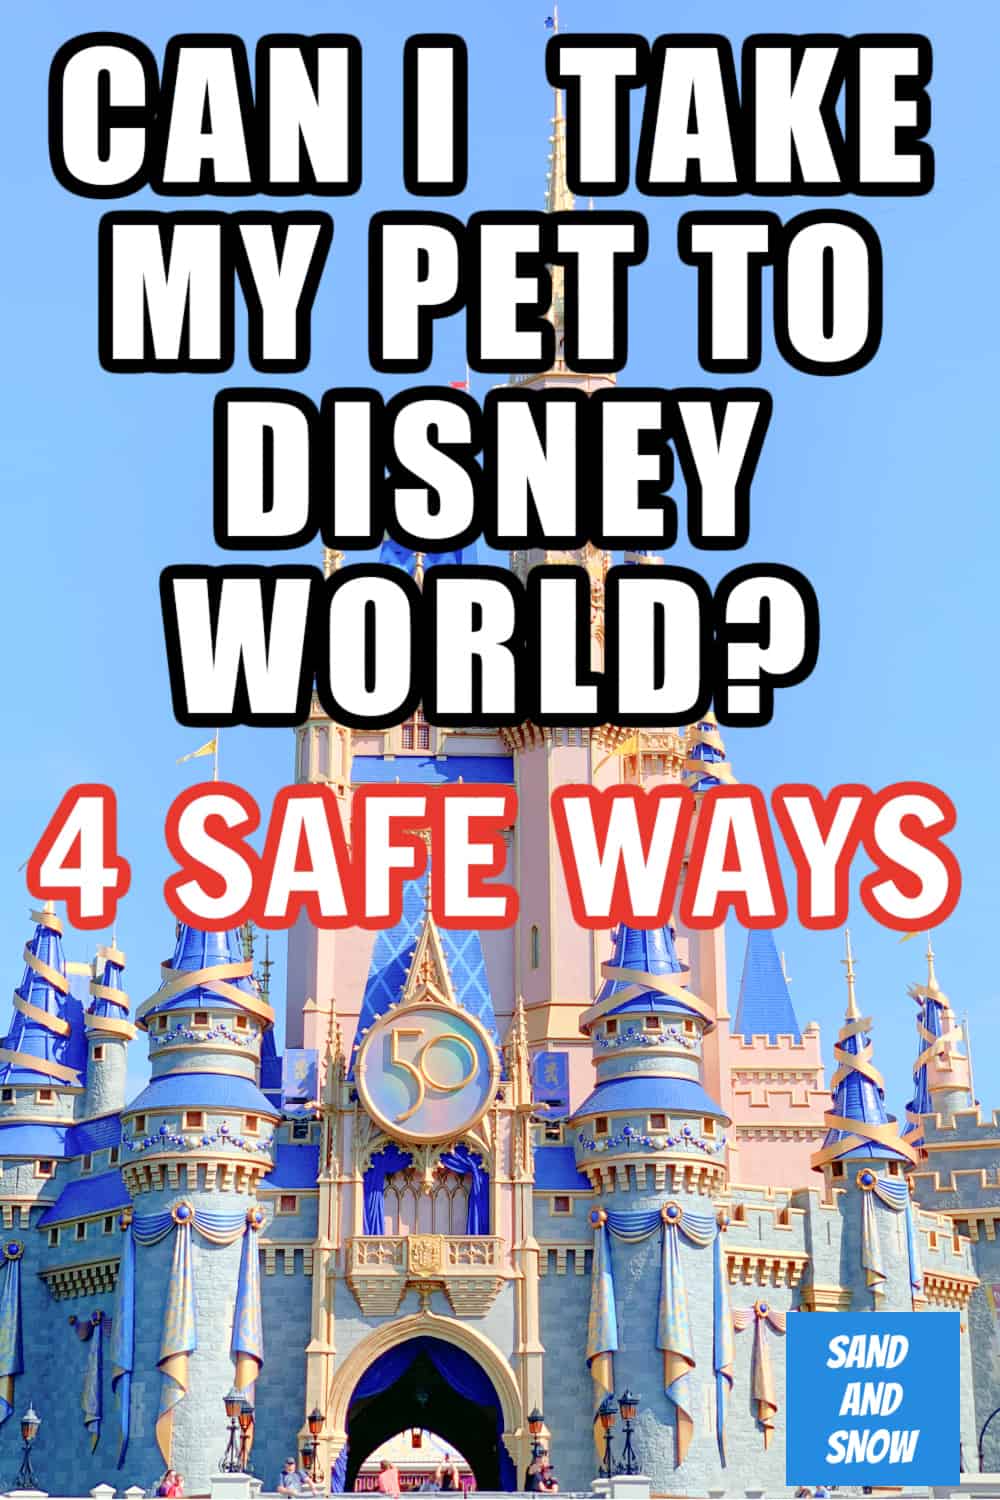 Can I bring my pet to Disney World? In a single word, yes! Here are four safe and legal ways to go to Disney World with your pet. #DisneyWorld #DisneyPets #WDW #DisneyTips